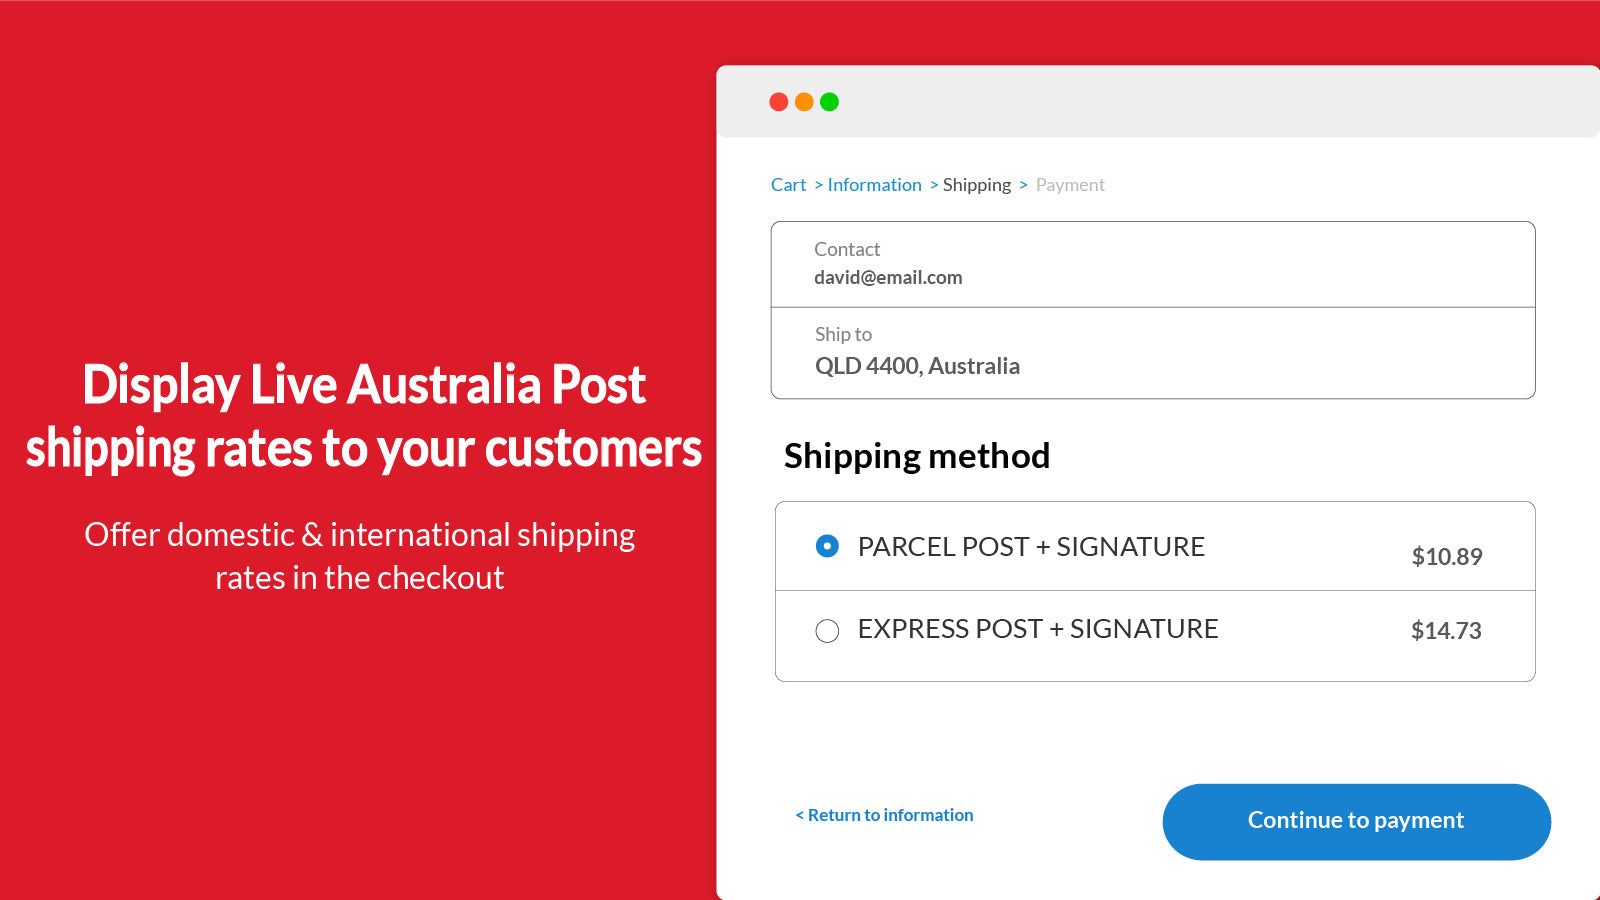 Display Live Australia Post Rates on the Checkout page